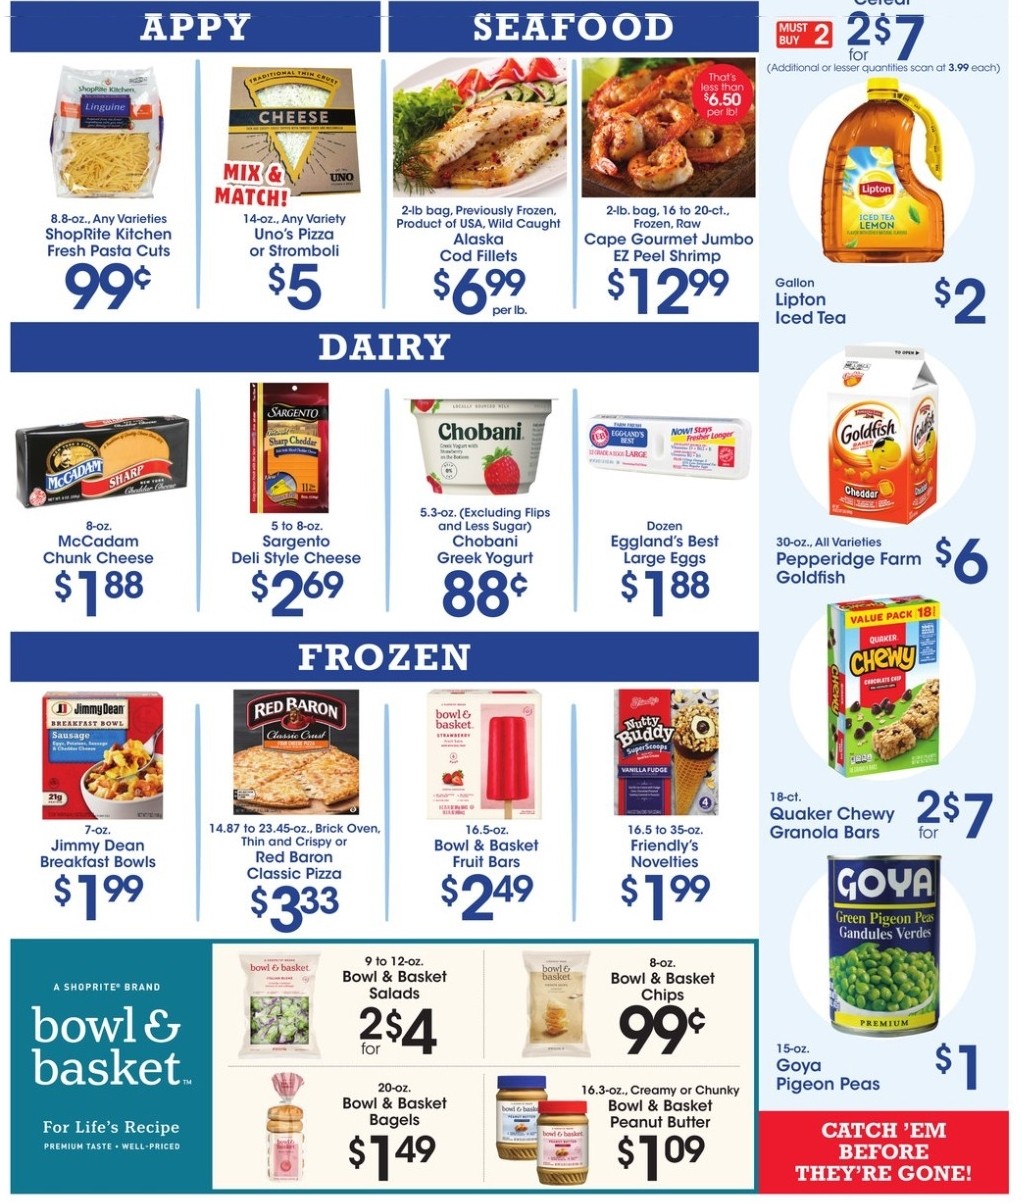 Price Rite Weekly Ad from July 17